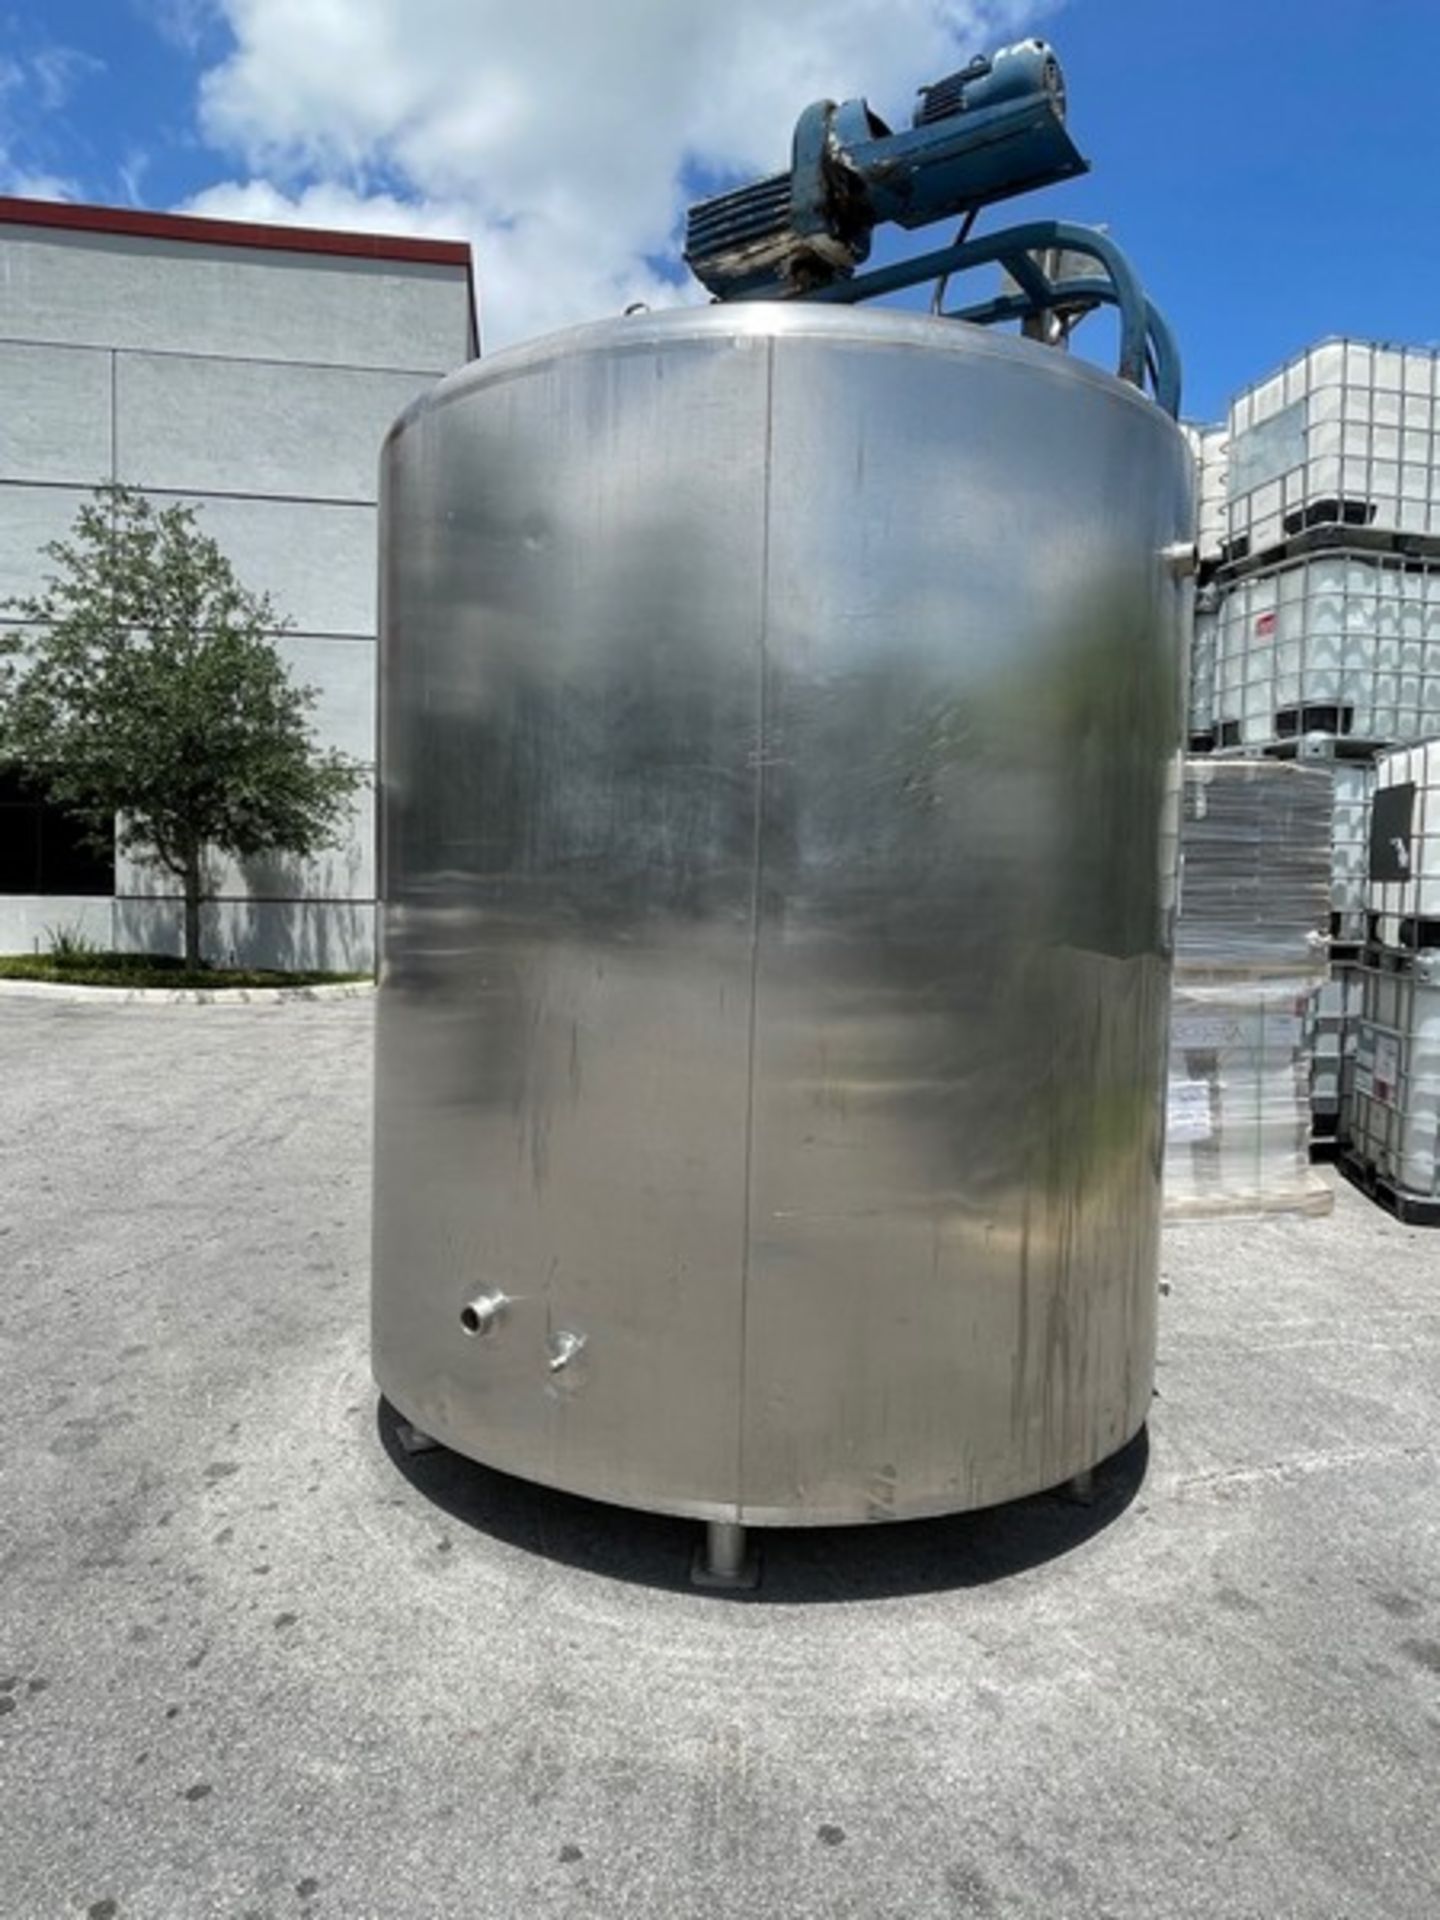 Walker 2,000 Gal. S/S Processing Tank, T-304, #C-7138 (Loading Fee $500) (Located Fort Lauderdale,